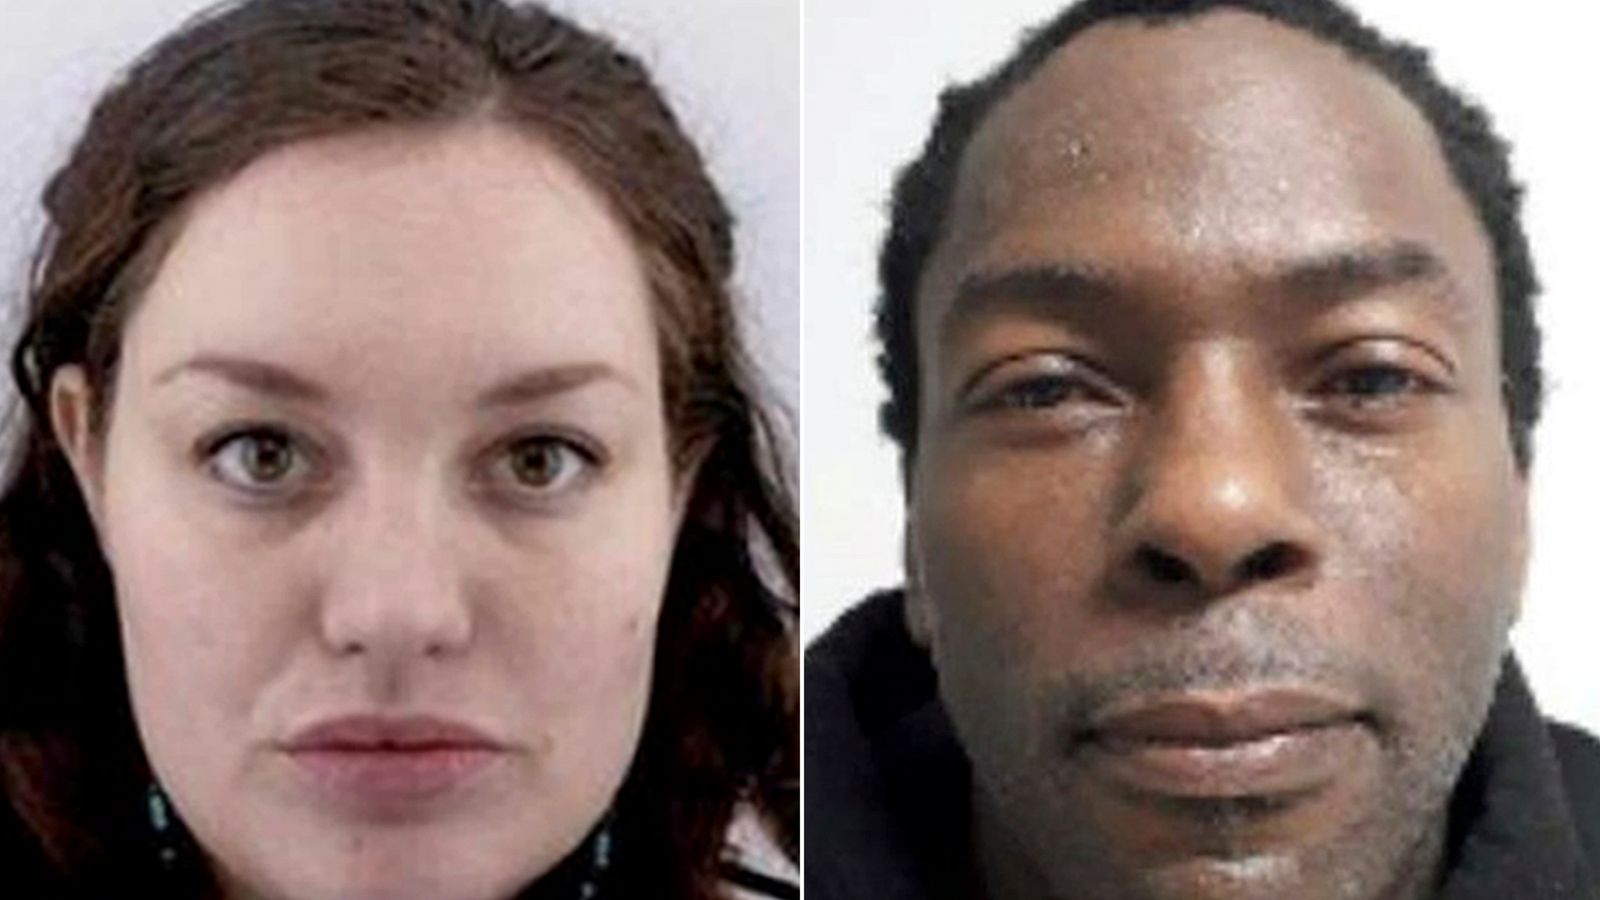 Police update appeal for missing couple and newborn baby as concern 'continues to grow'